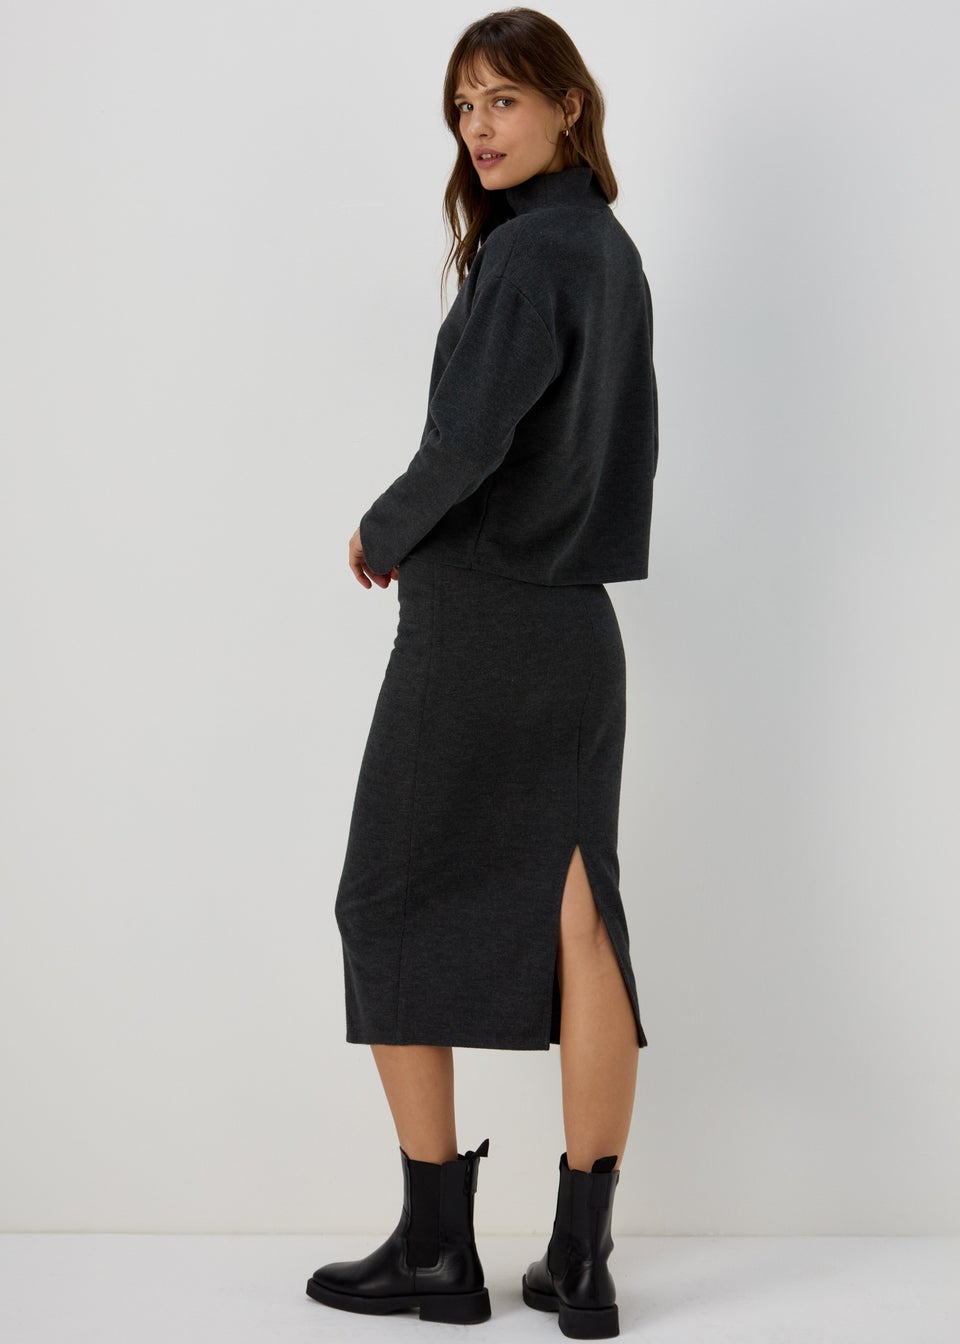 Charcoal Soft Touch Midi Skirt